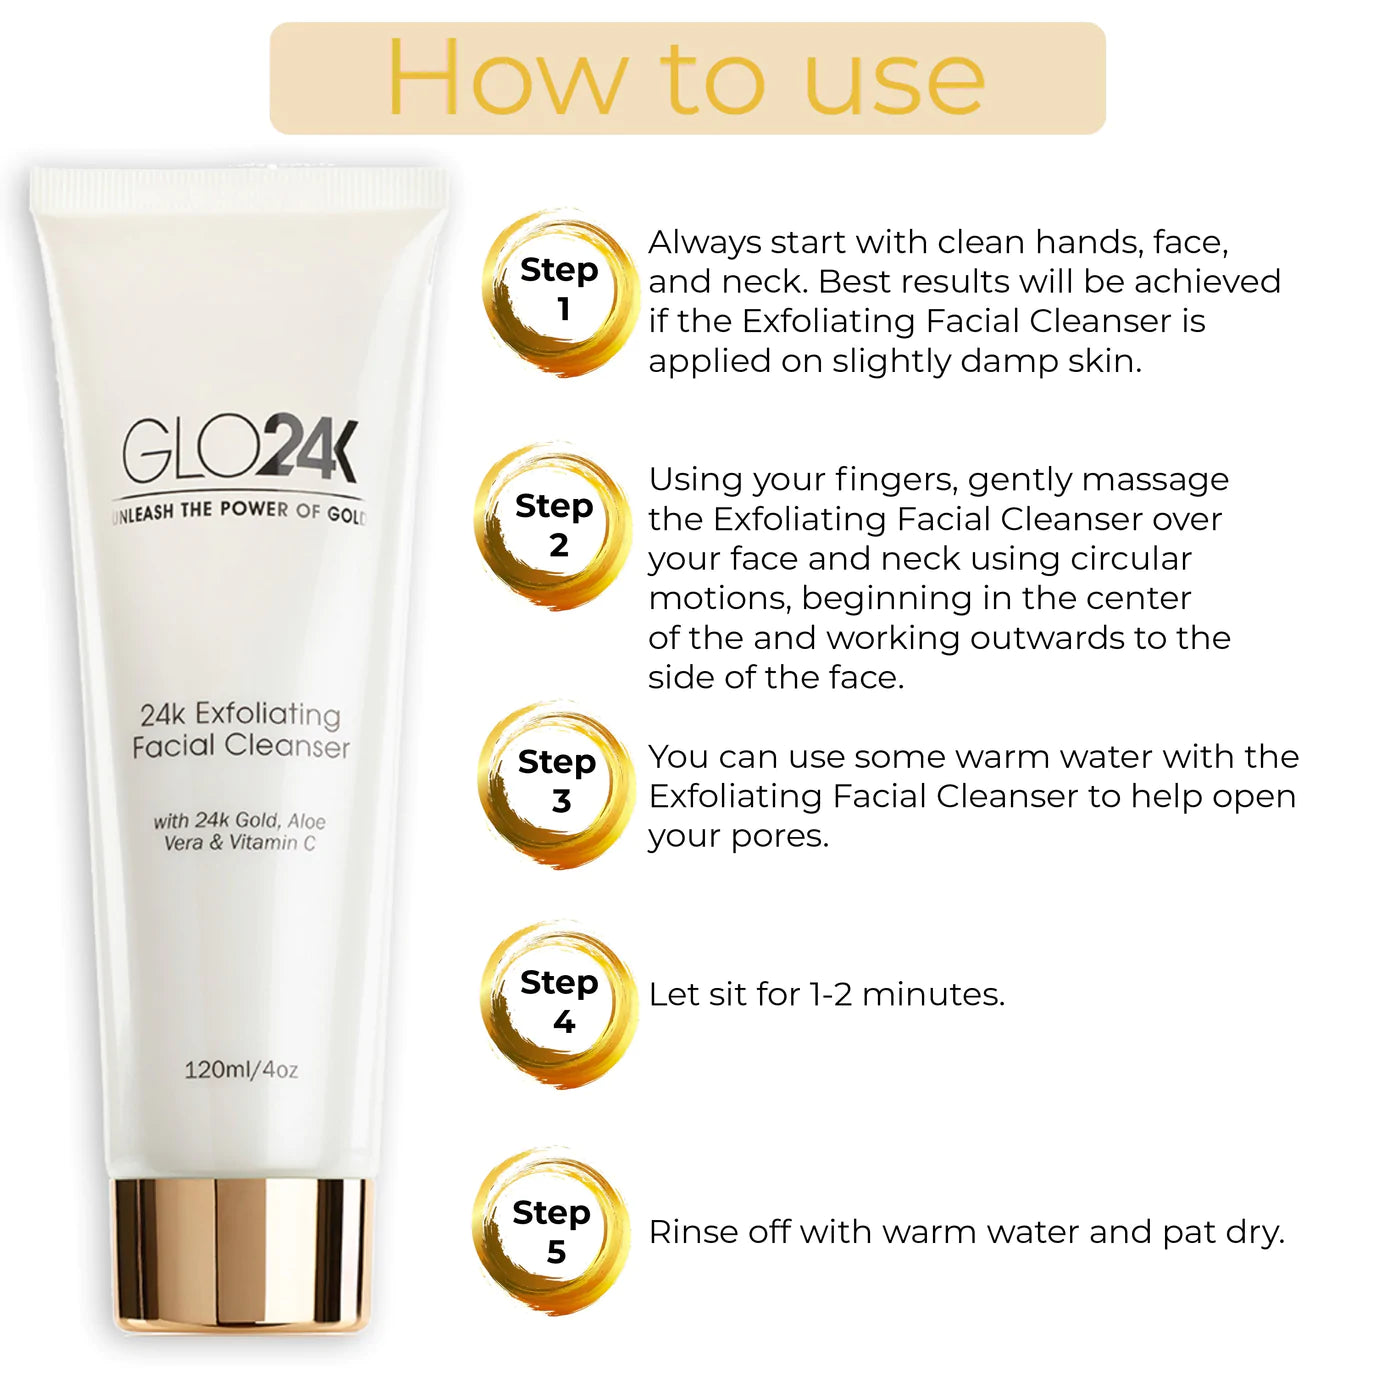 How to use GLO24K 24k Exfoliating Facial Cleanser